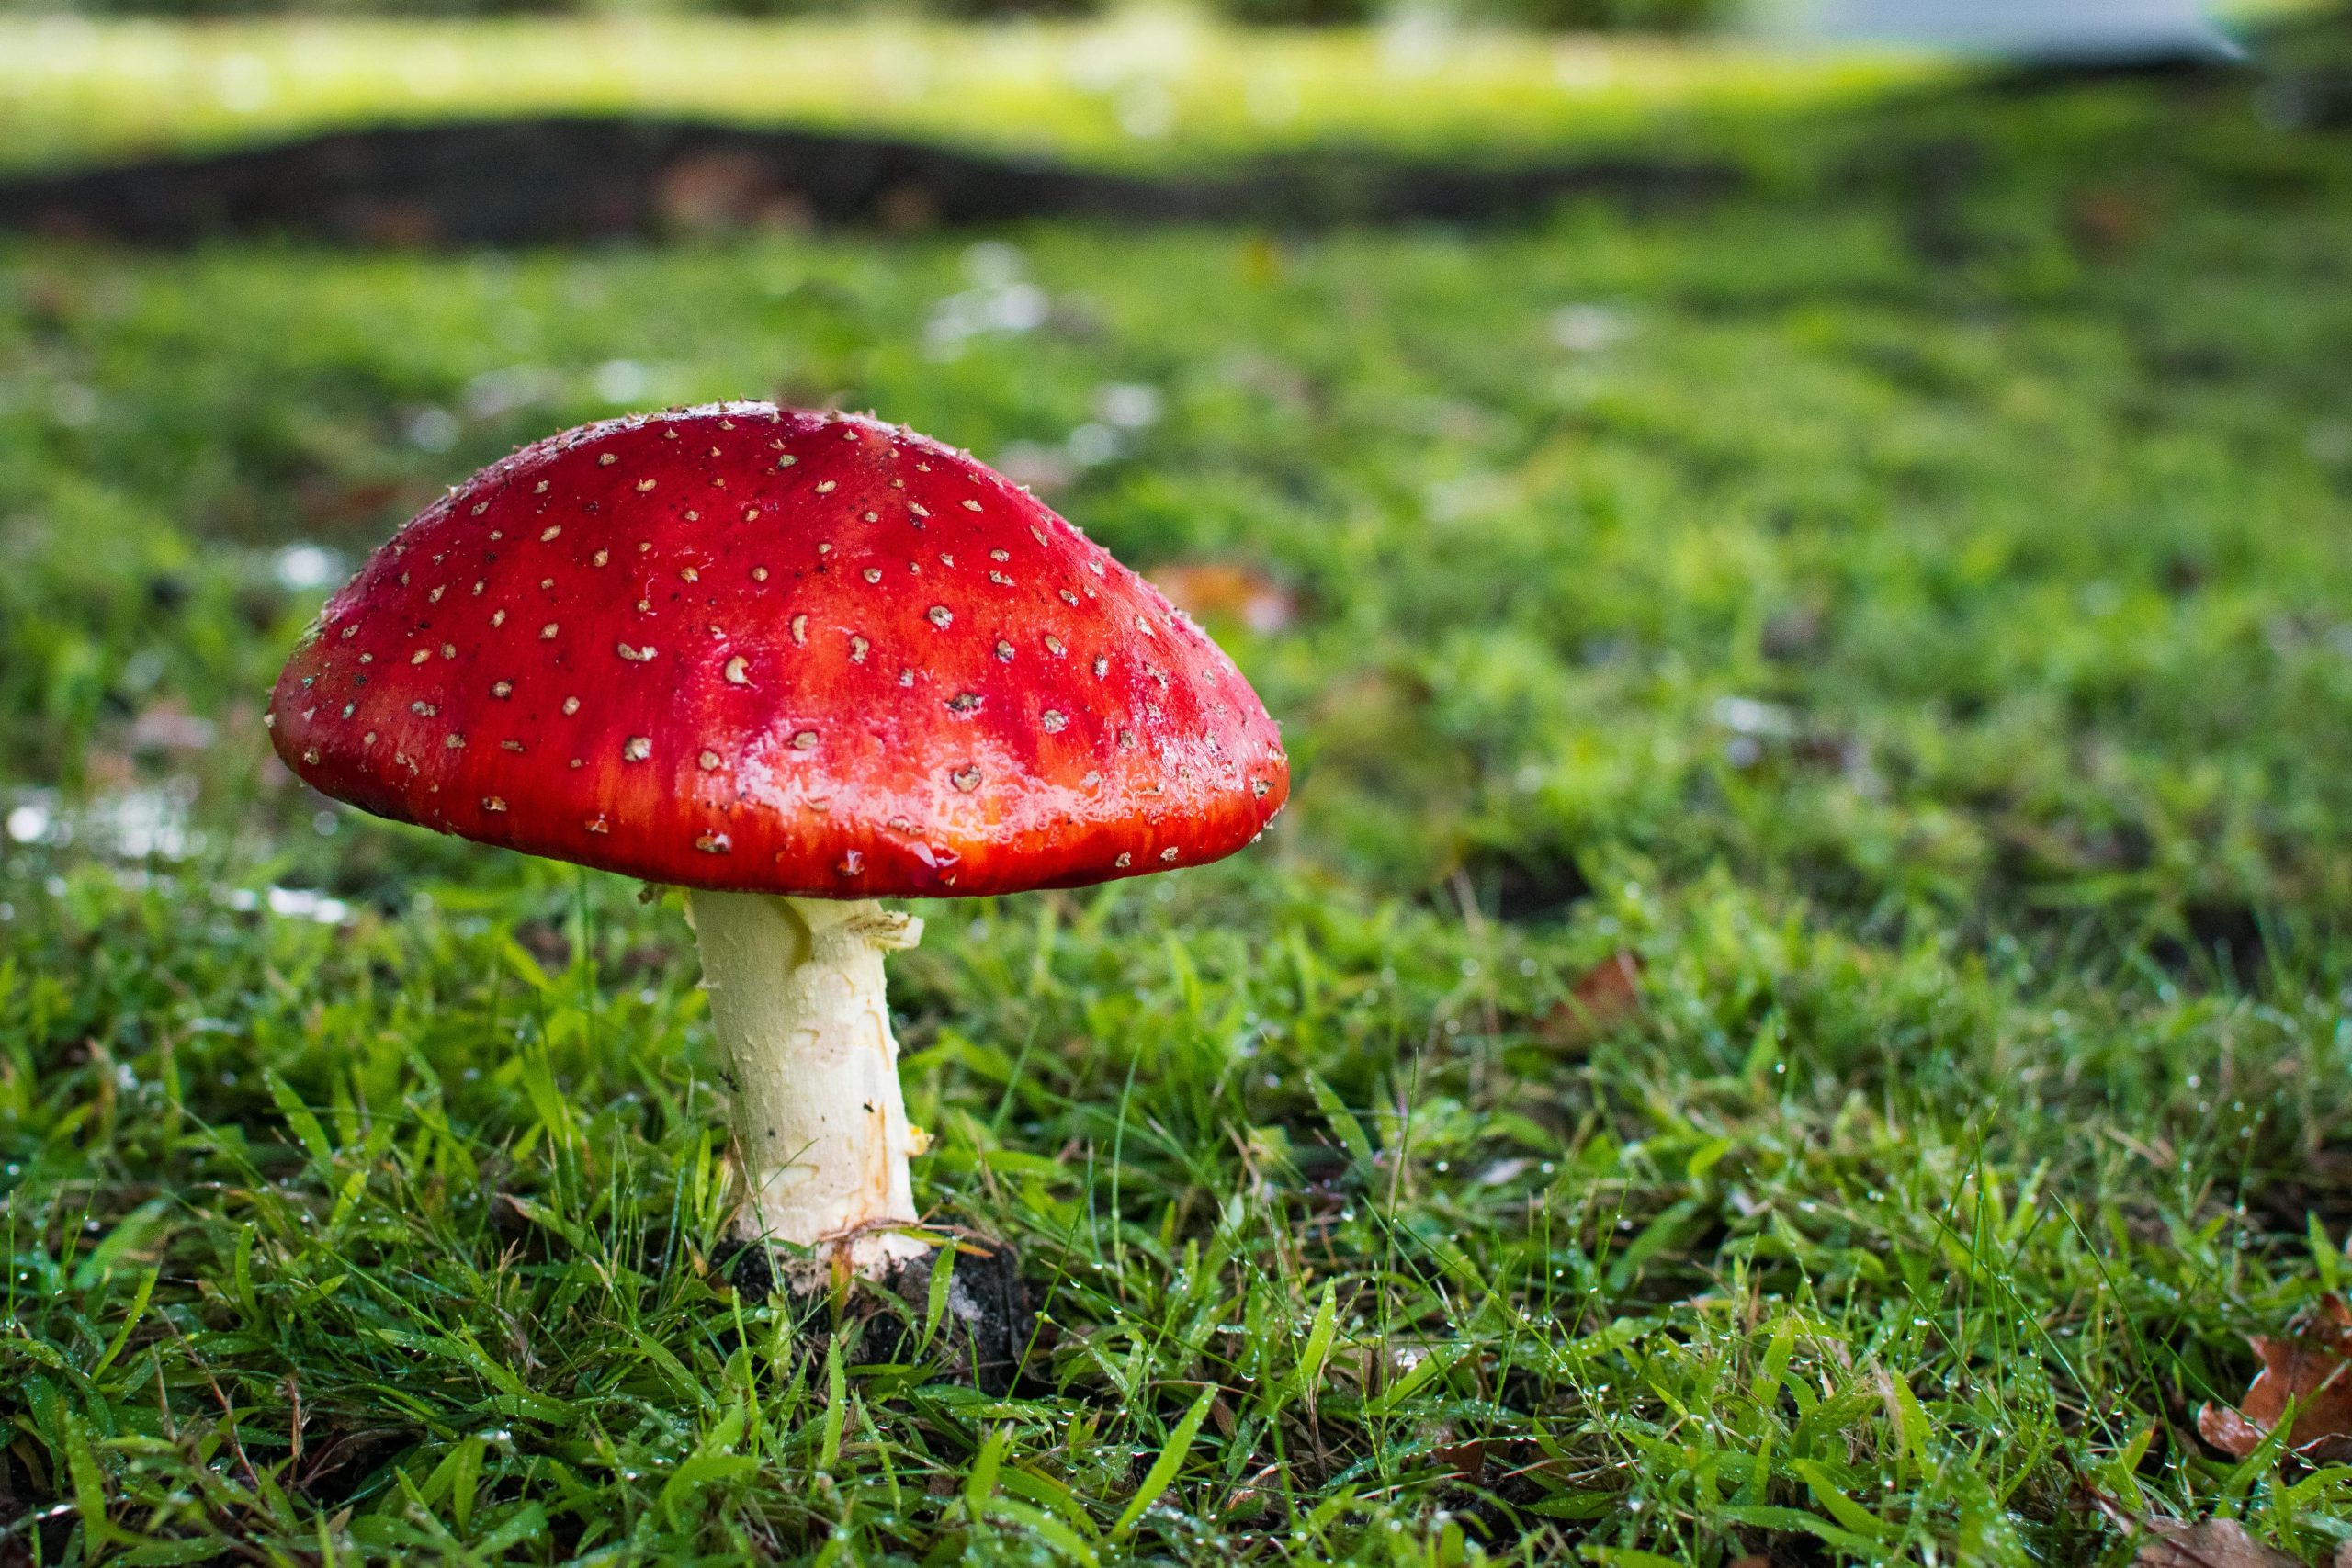 Red toadstool in lawn.